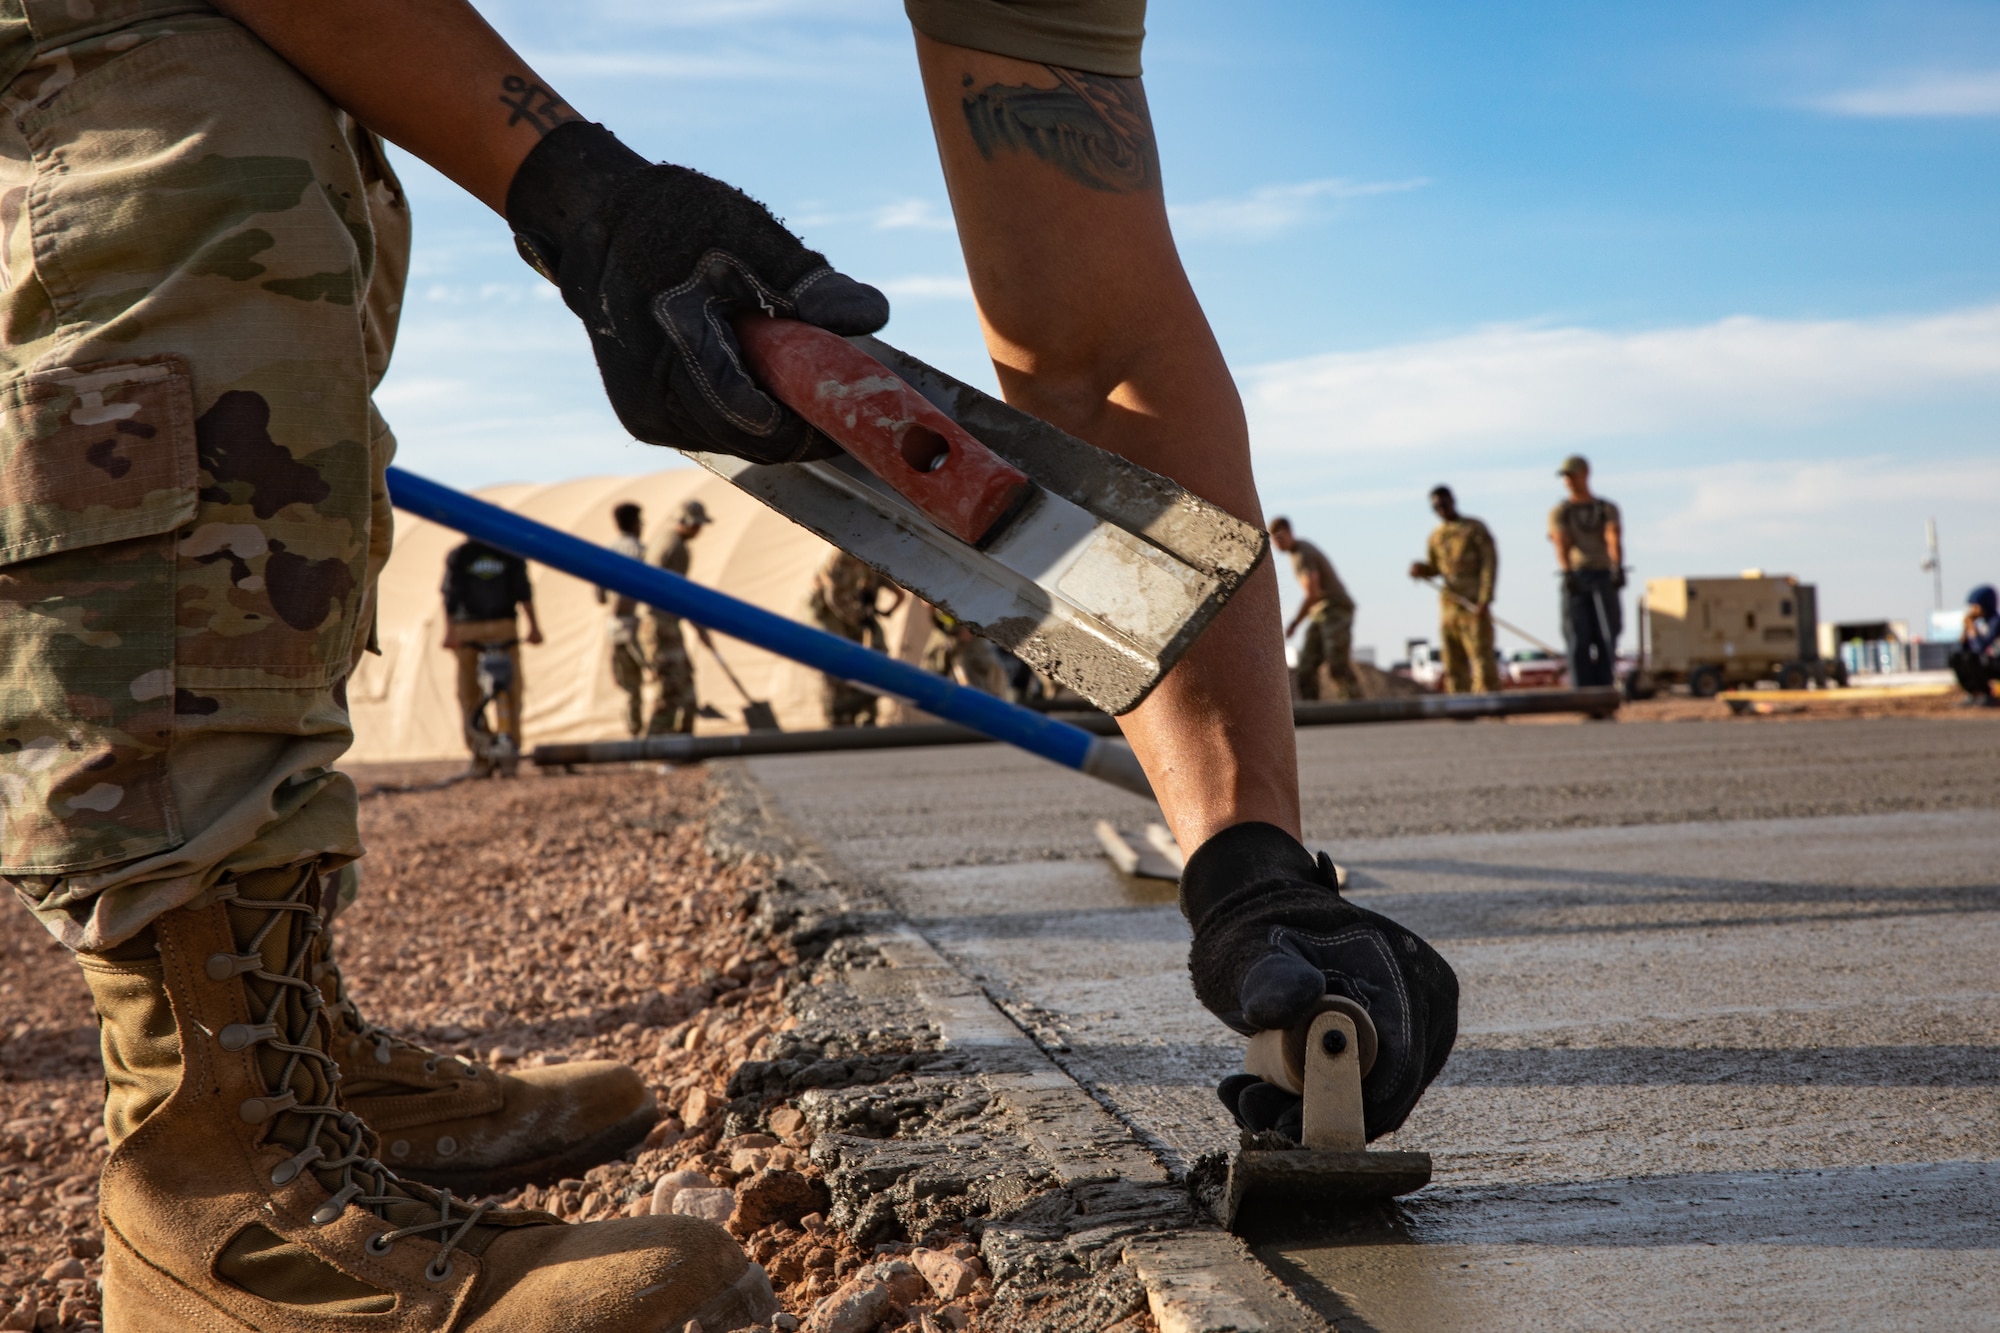 Airmen assigned to Task Force-Holloman smooth fresh concrete for a recreational area for Afghan evacuees on Holloman Air Force Base, New Mexico, Sept. 23, 2021. The Department of Defense, through the U.S. Northern Command, and in support of the Department of State and Department of Homeland Security, is providing transportation, temporary housing, medical screening, and general support for at least 50,000 Afghan evacuees at suitable facilities, in permanent or temporary structures, as quickly as possible. This initiative provides Afghan evacuees essential support at secure locations outside Afghanistan. (U.S. Army photo by Spc. Nicholas Goodman)